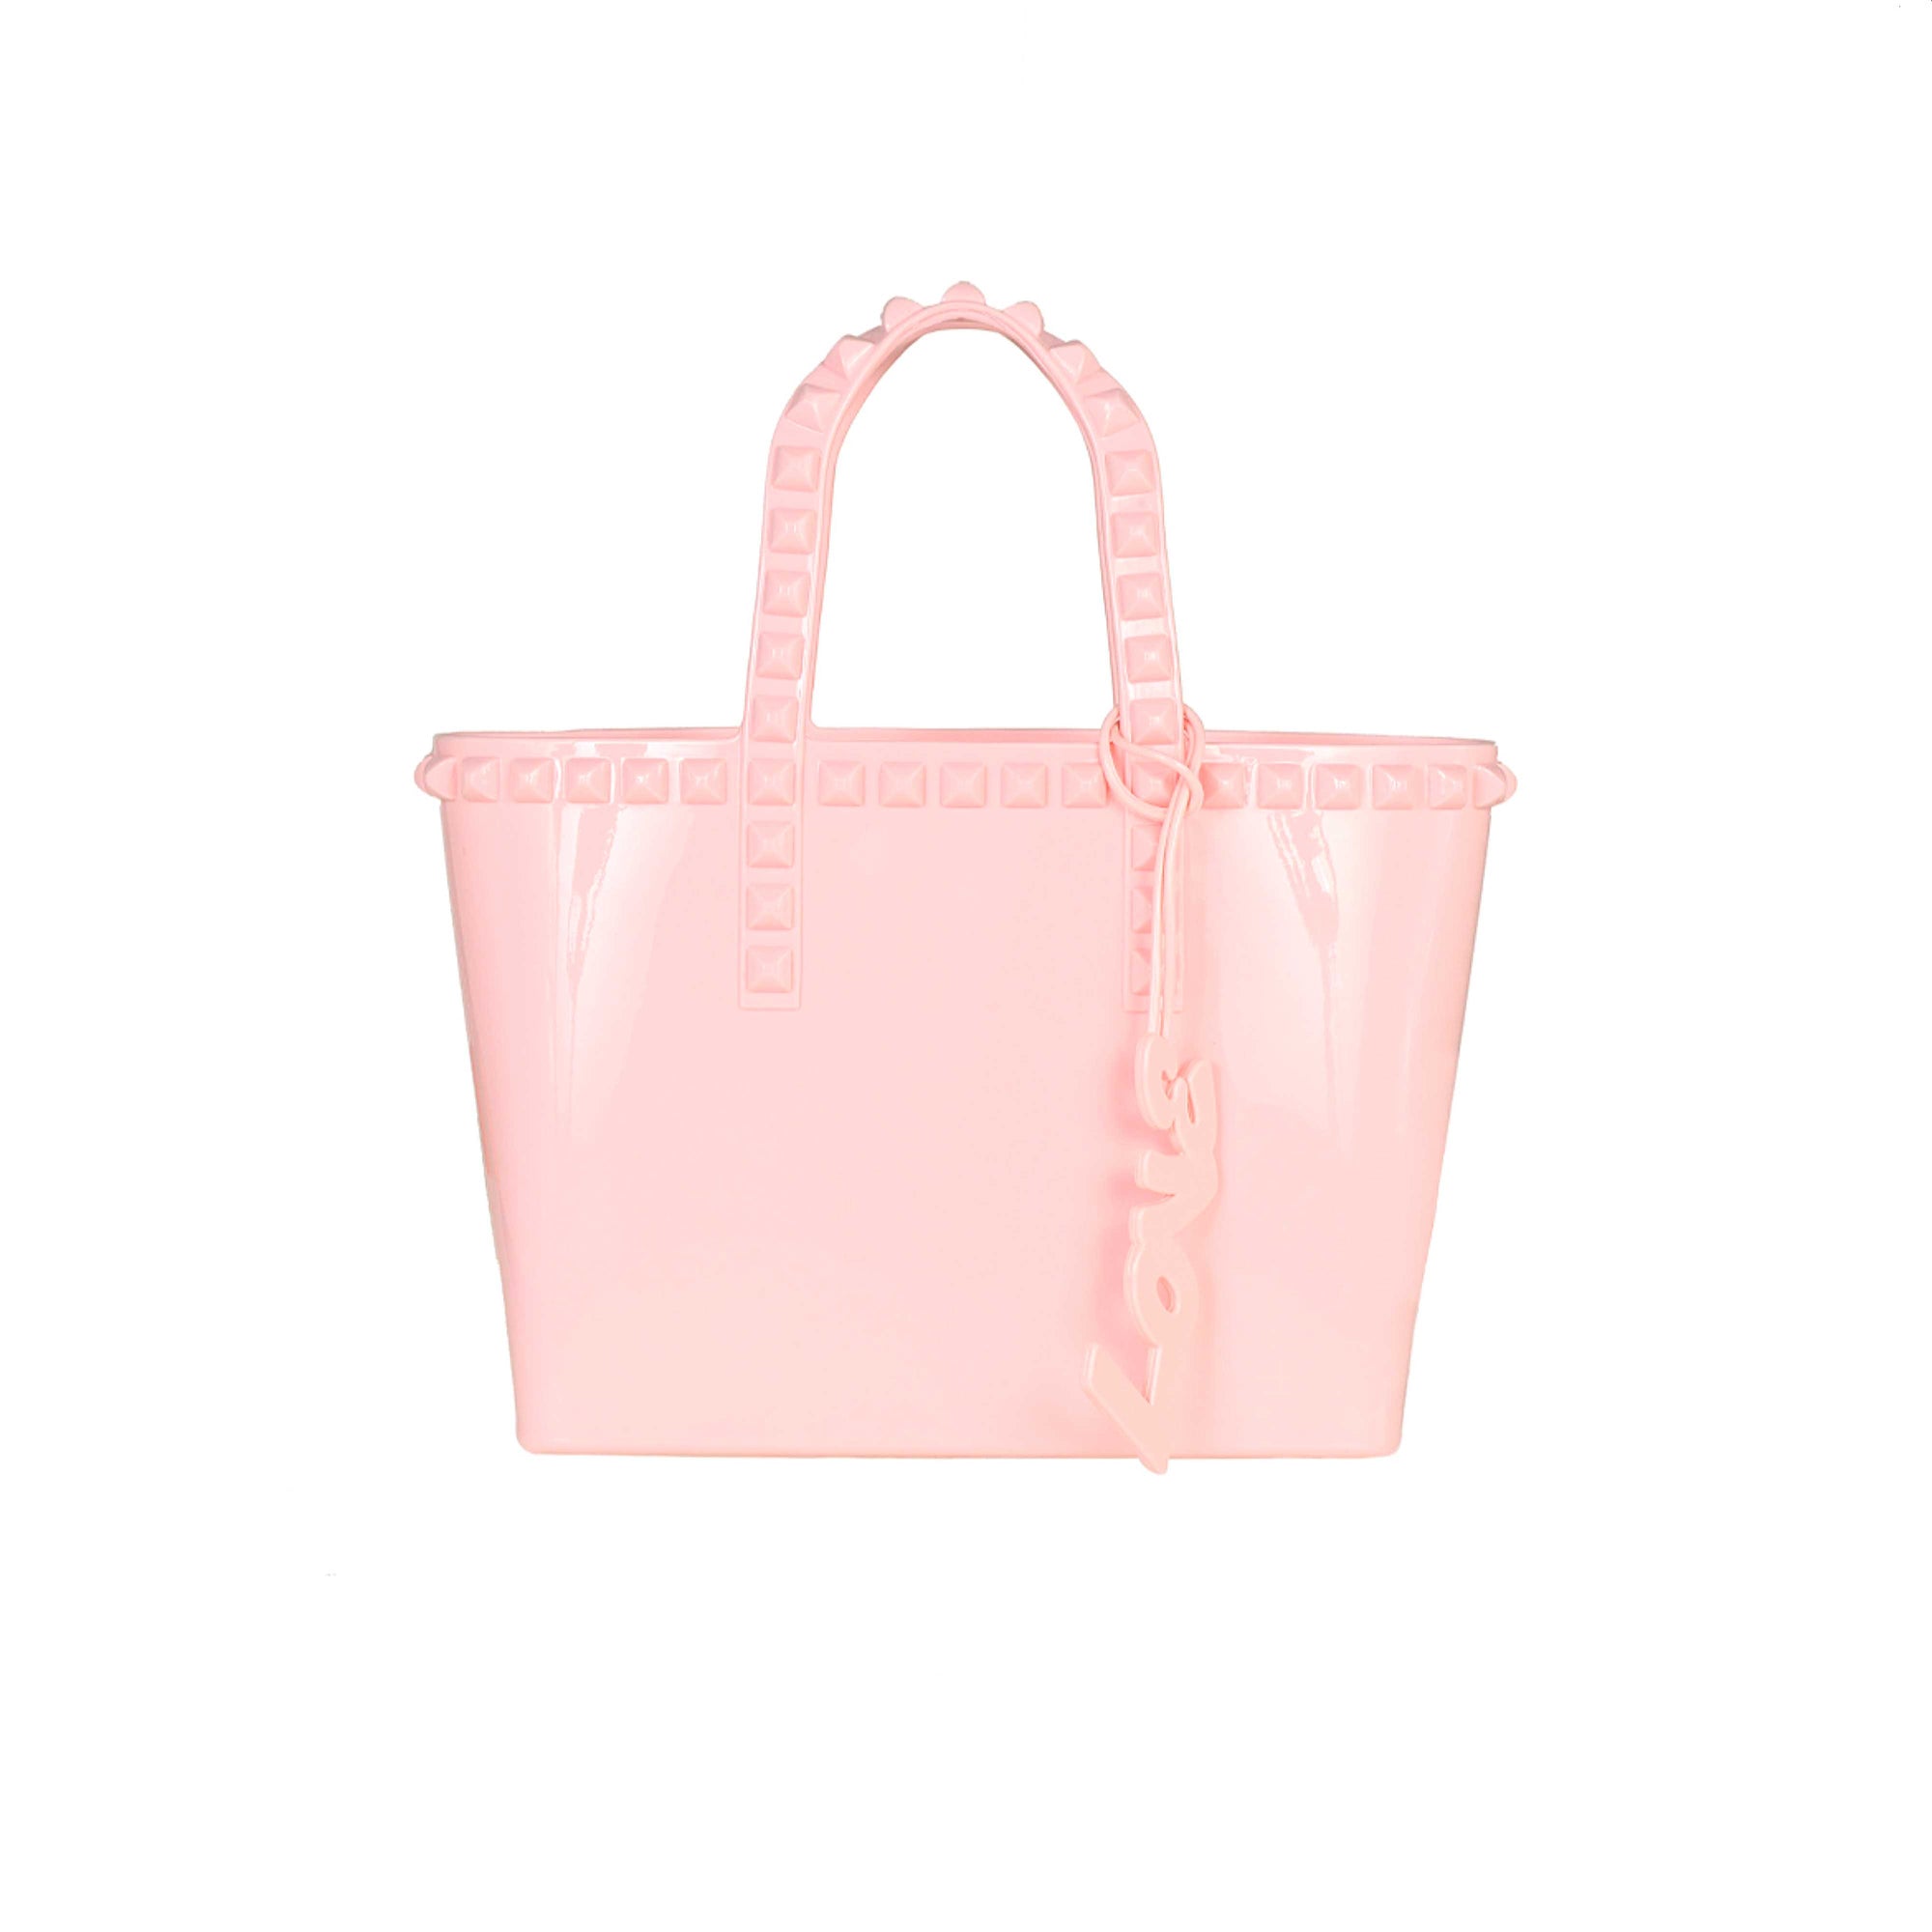 Baby pink mini jelly purse for kids from Carmen Sol